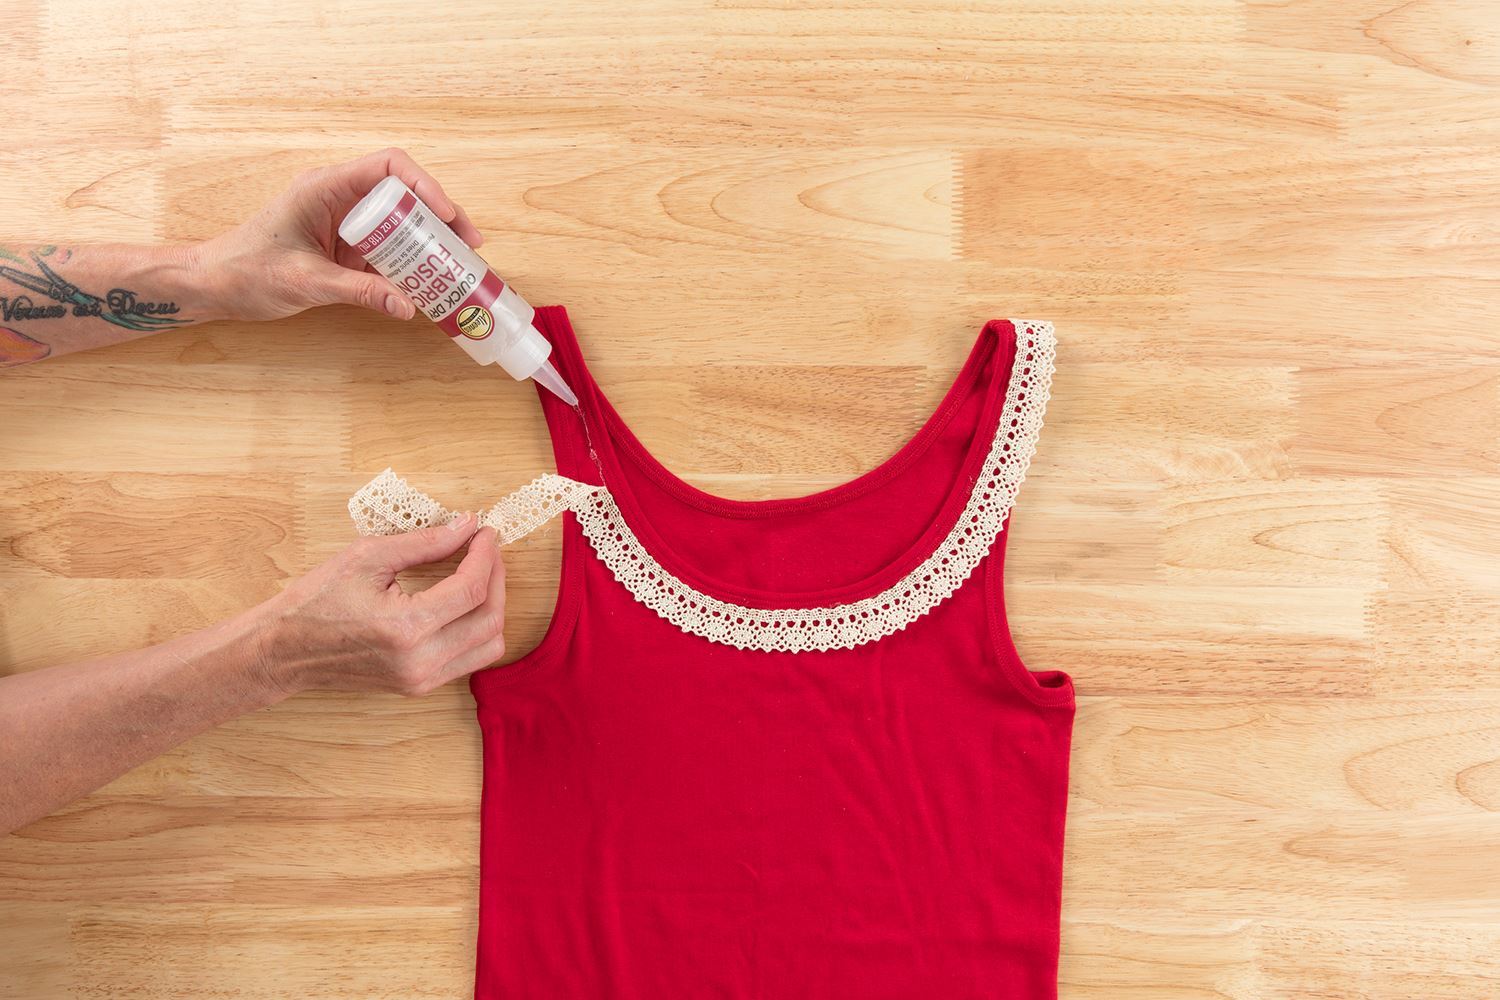 How To Glue Lace to Clothing